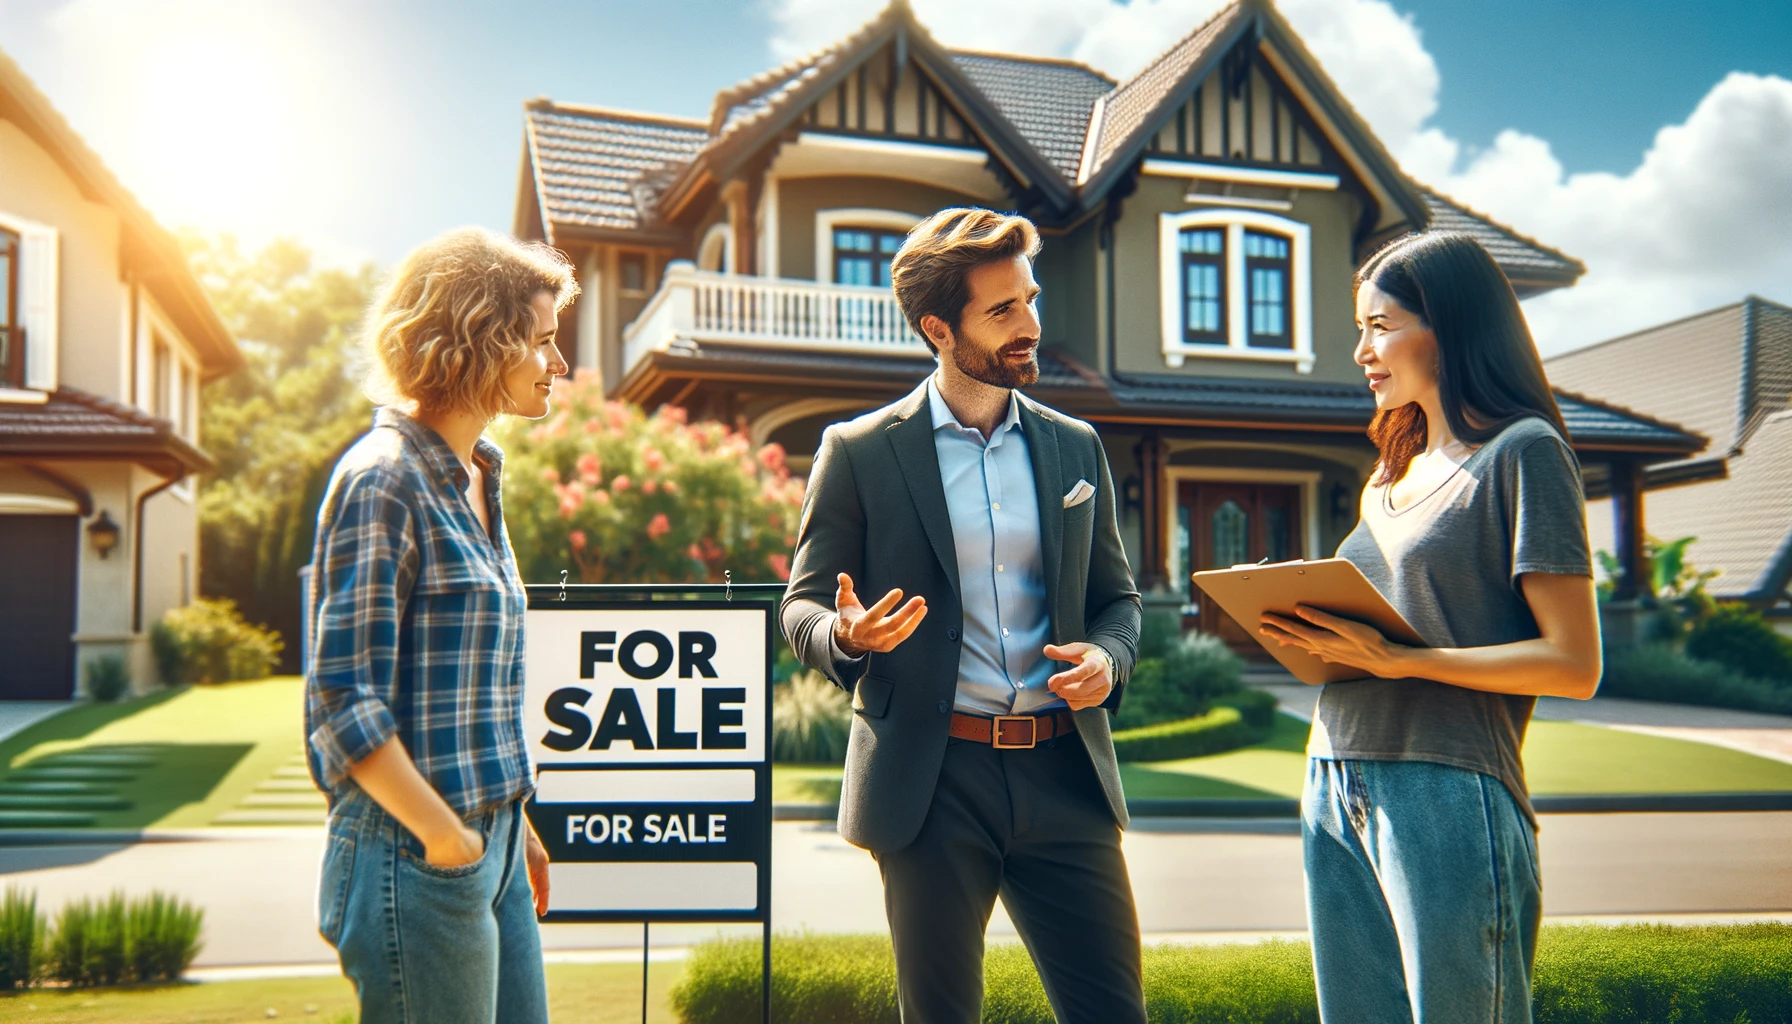 Realtor discussing house sale with couple outside home